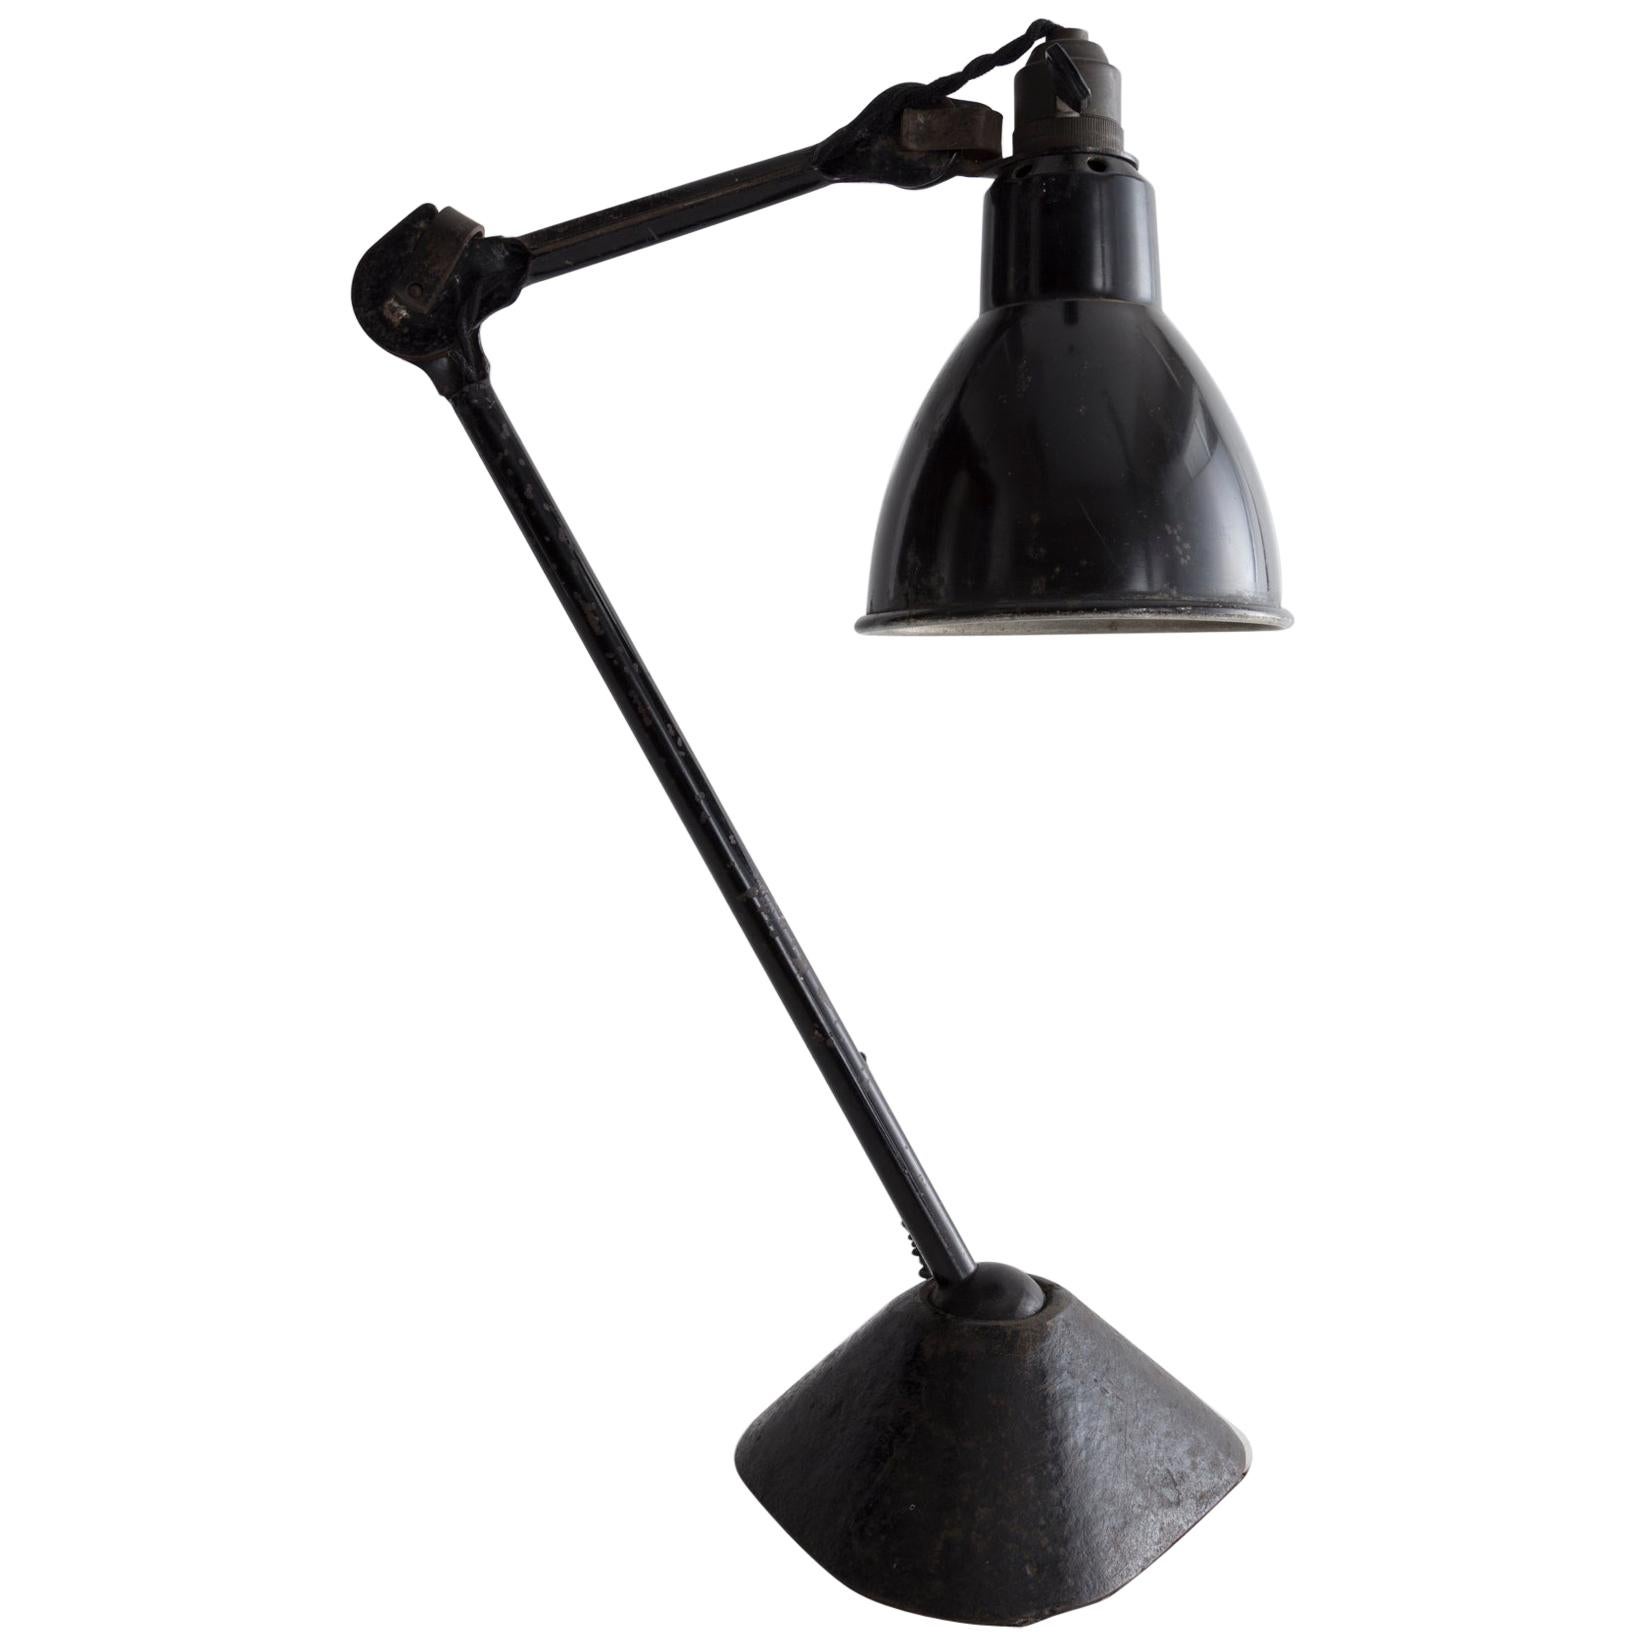 Table Lamp in Black Metal with Triangular Base by Bernard-Albin Gras, 1920s